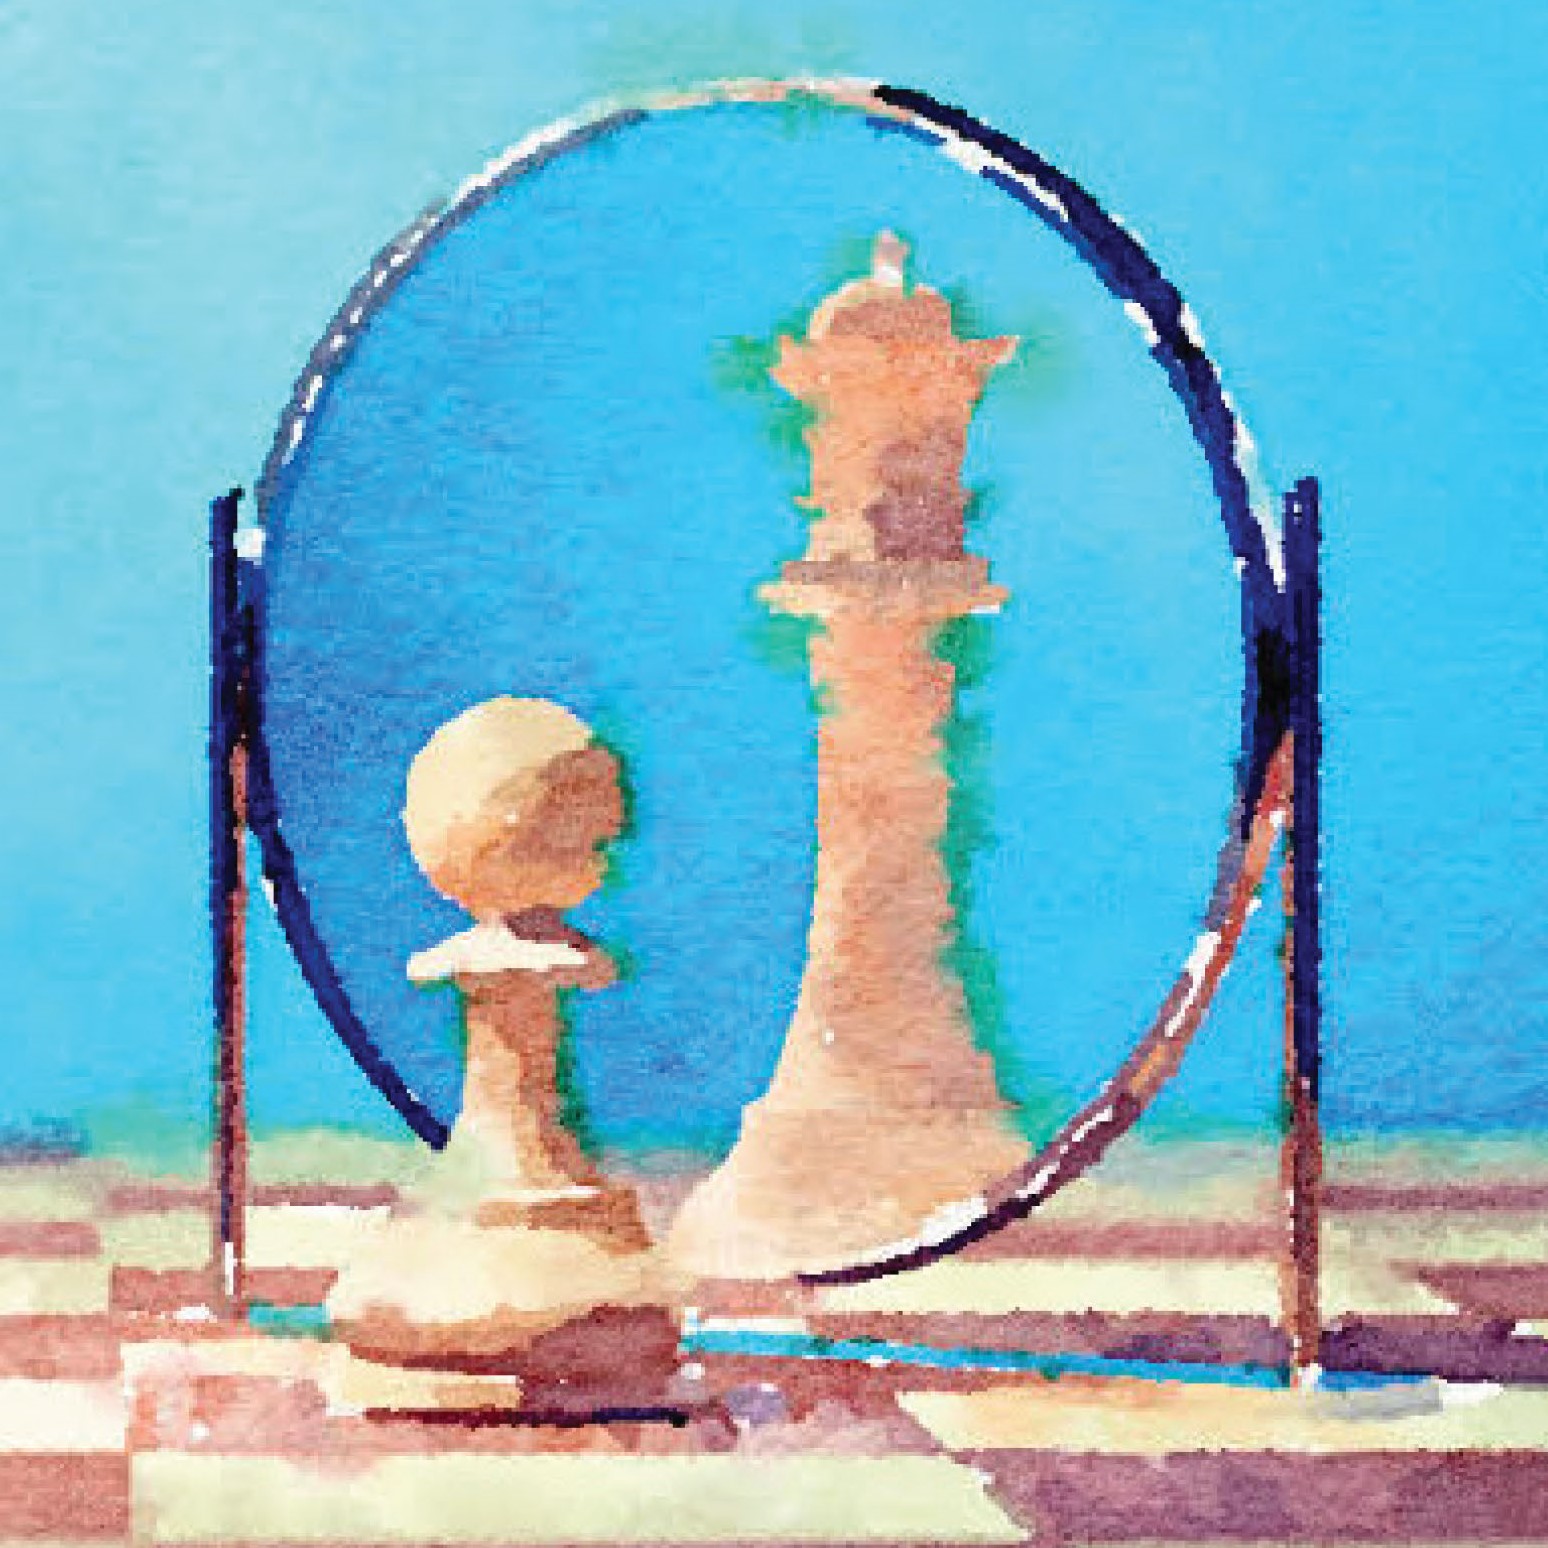 Chess Pawn seeing its reflection as a Queen in the mirror.